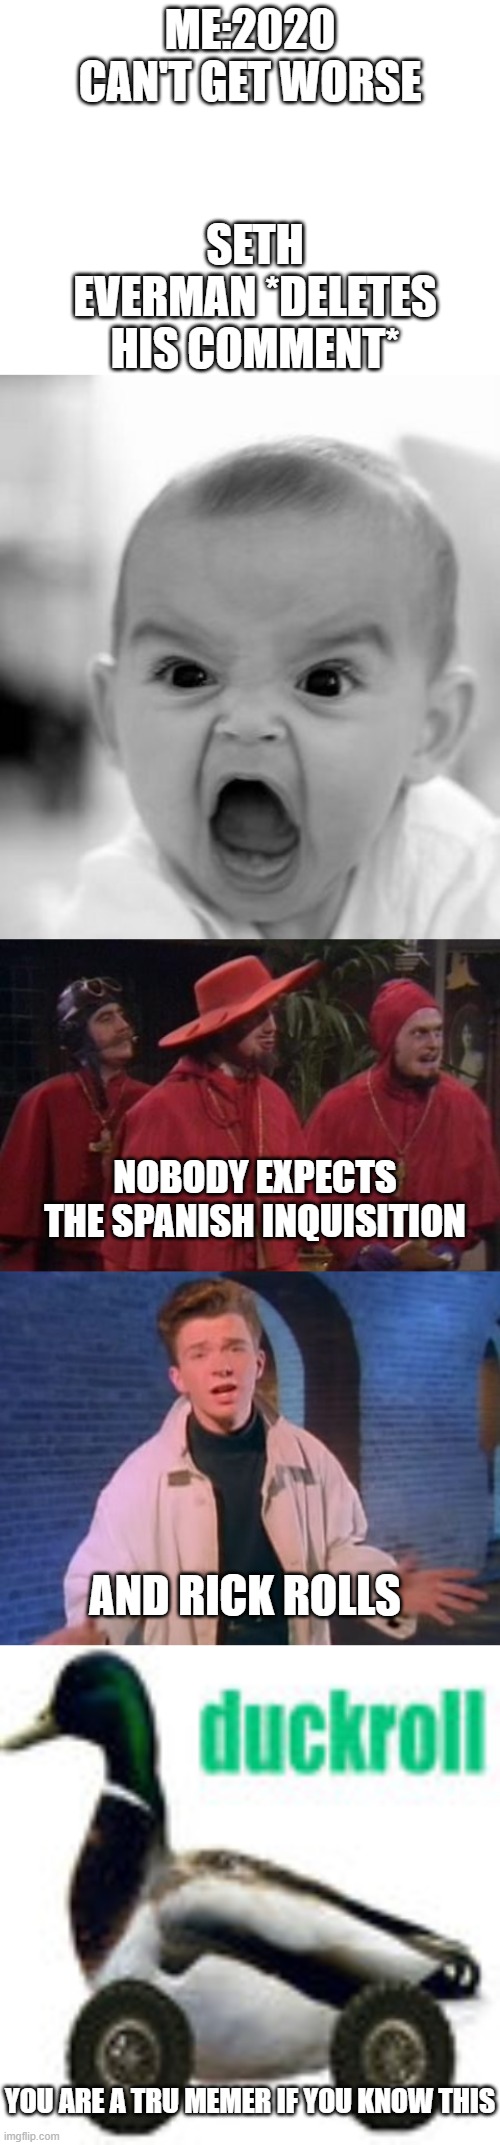 ME:2020 CAN'T GET WORSE; SETH EVERMAN *DELETES HIS COMMENT*; NOBODY EXPECTS THE SPANISH INQUISITION; AND RICK ROLLS; YOU ARE A TRU MEMER IF YOU KNOW THIS | image tagged in memes,angry baby,blank white template,nobody expects the spanish inquisition monty python,rick astley never gonna let you down,memes | made w/ Imgflip meme maker